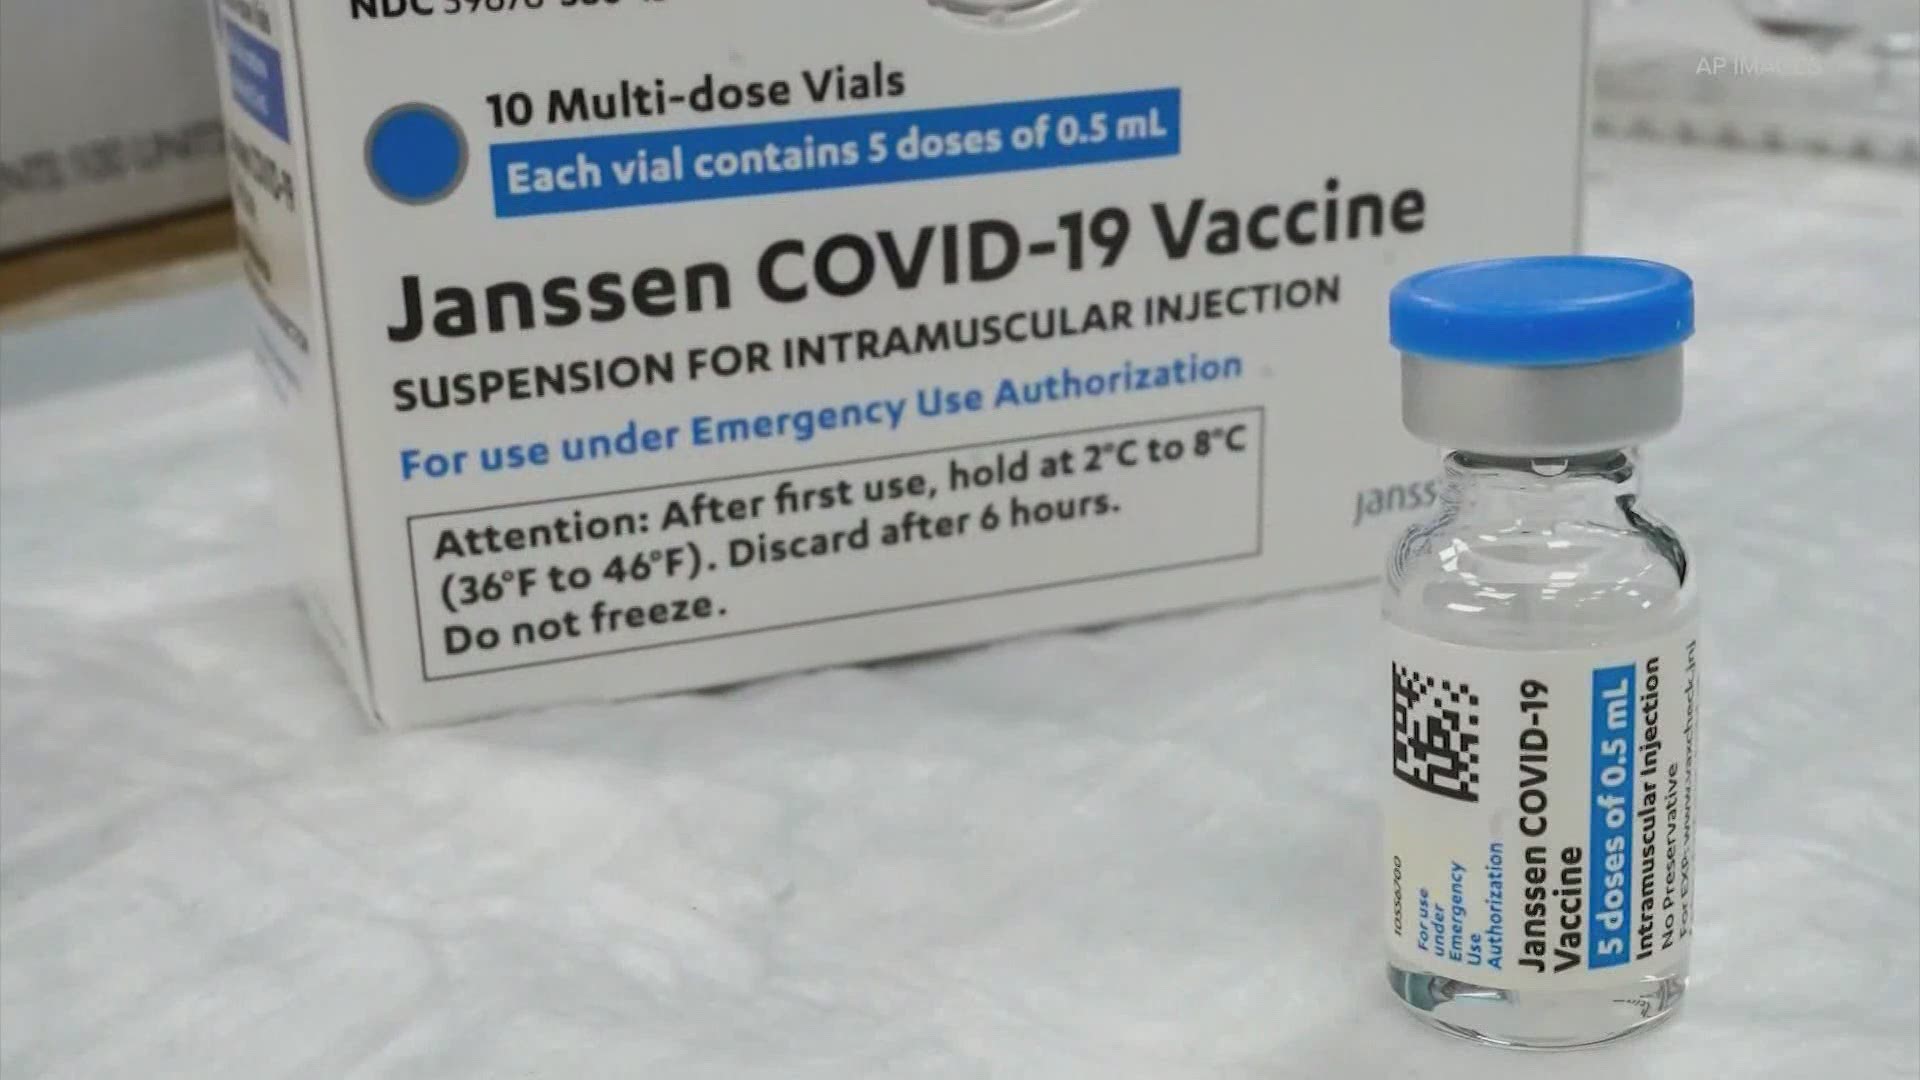 Gov. Jay Inslee announced Saturday the lifting on a pause of the Johnson & Johnson COVID-19 vaccine.